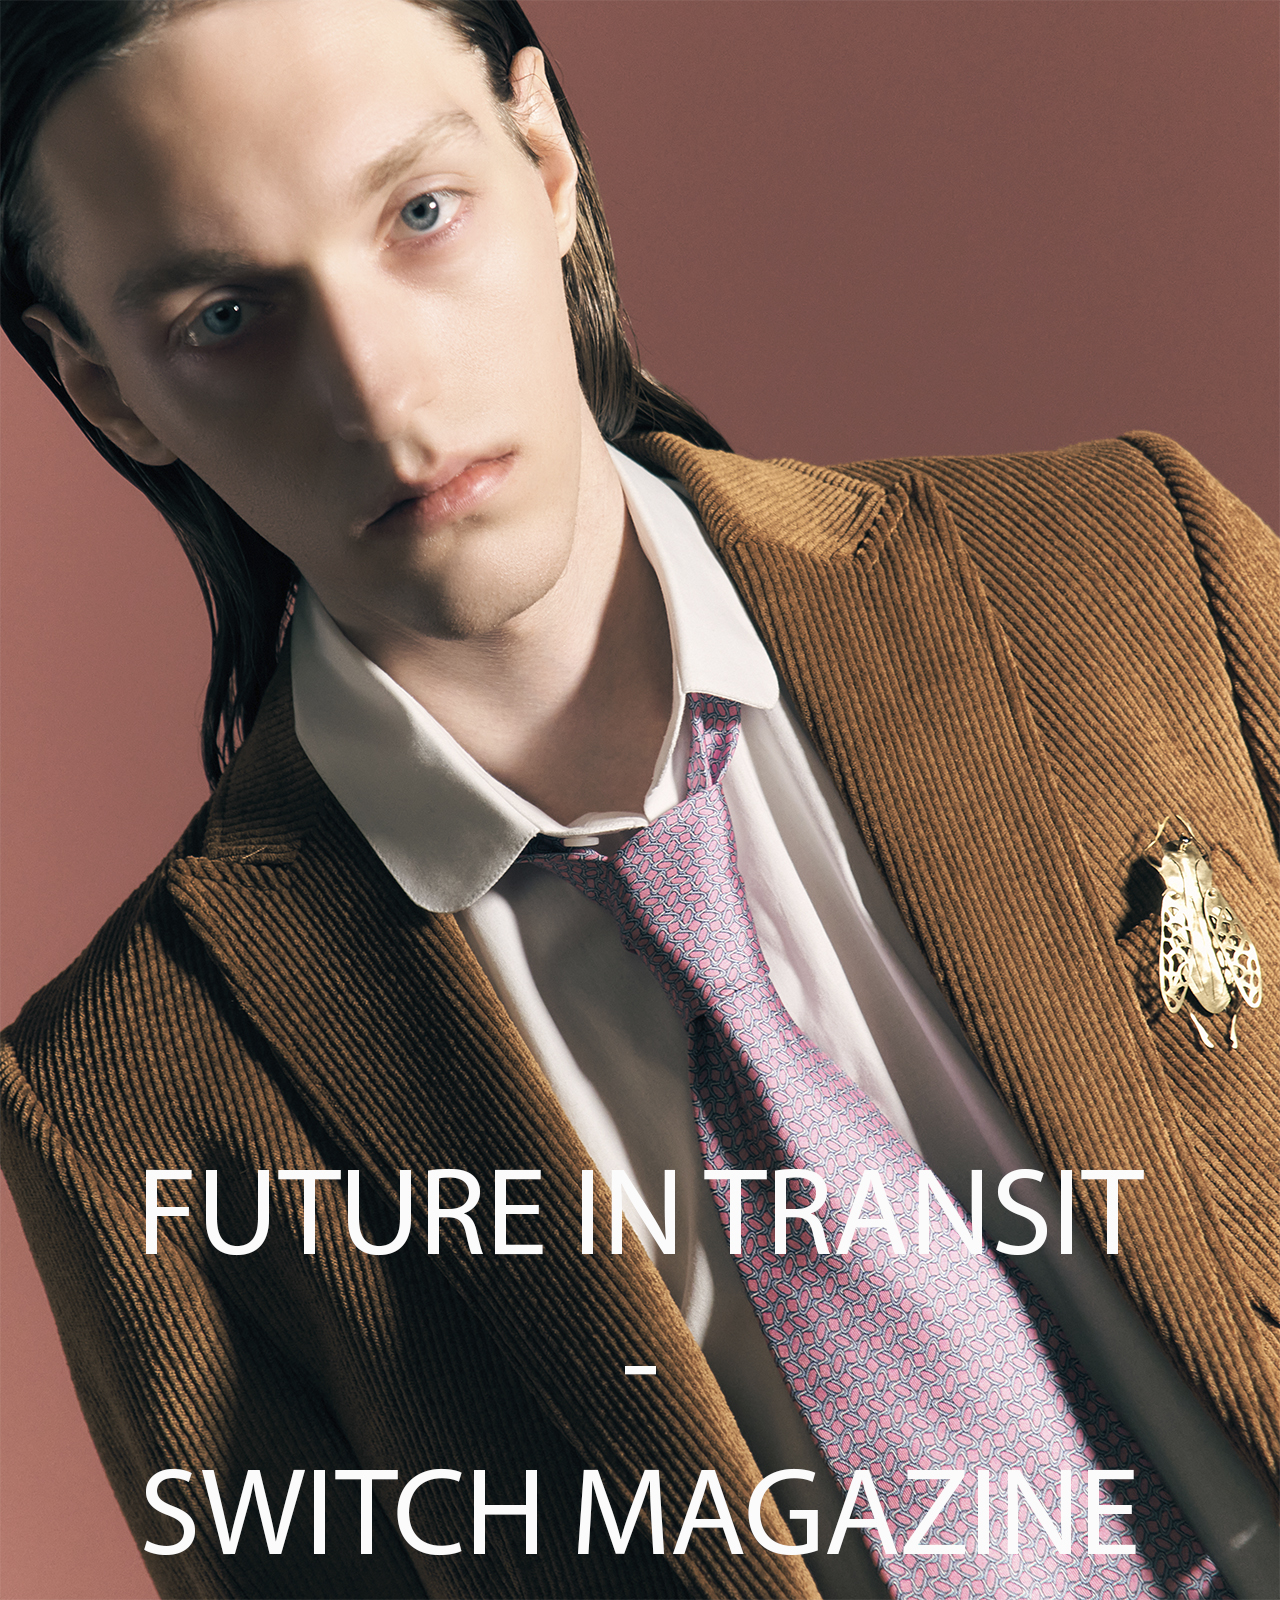 FUTURE IN TRANSIT - switch magazine next by Andrea Reina